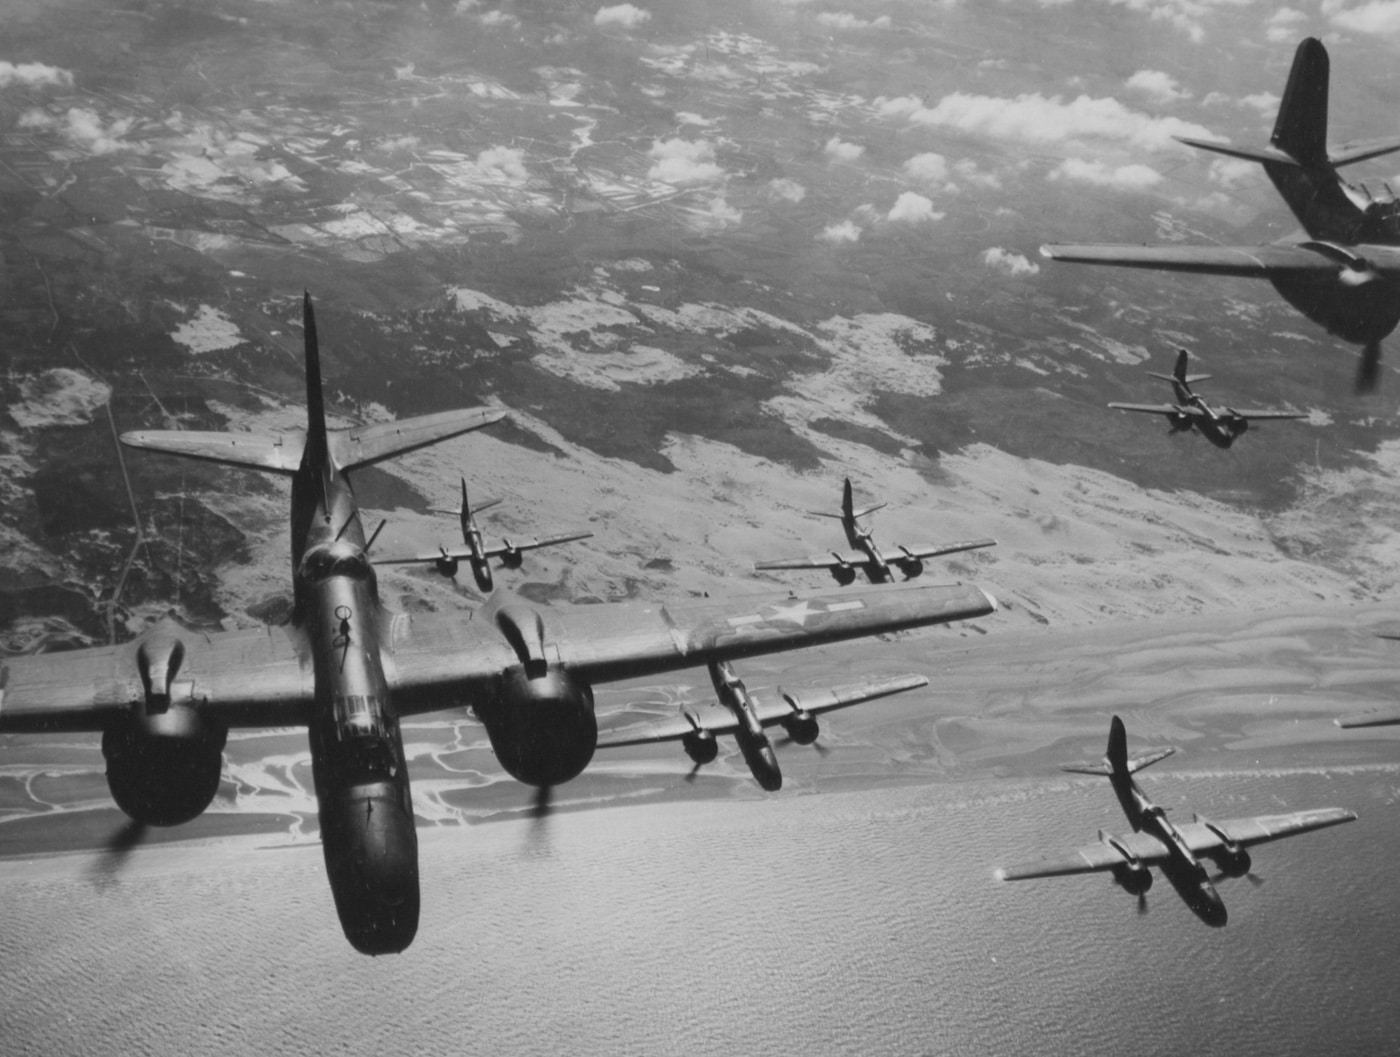 This image shows a formation of Douglas A-20G Havoc bombers going "feet wet" over the English Channel after a bombing mission in Normandy, France. The U.S. Army Air Force had a wide range of light, medium and heavy bombers at its disposal to hit Nazi Germany with.